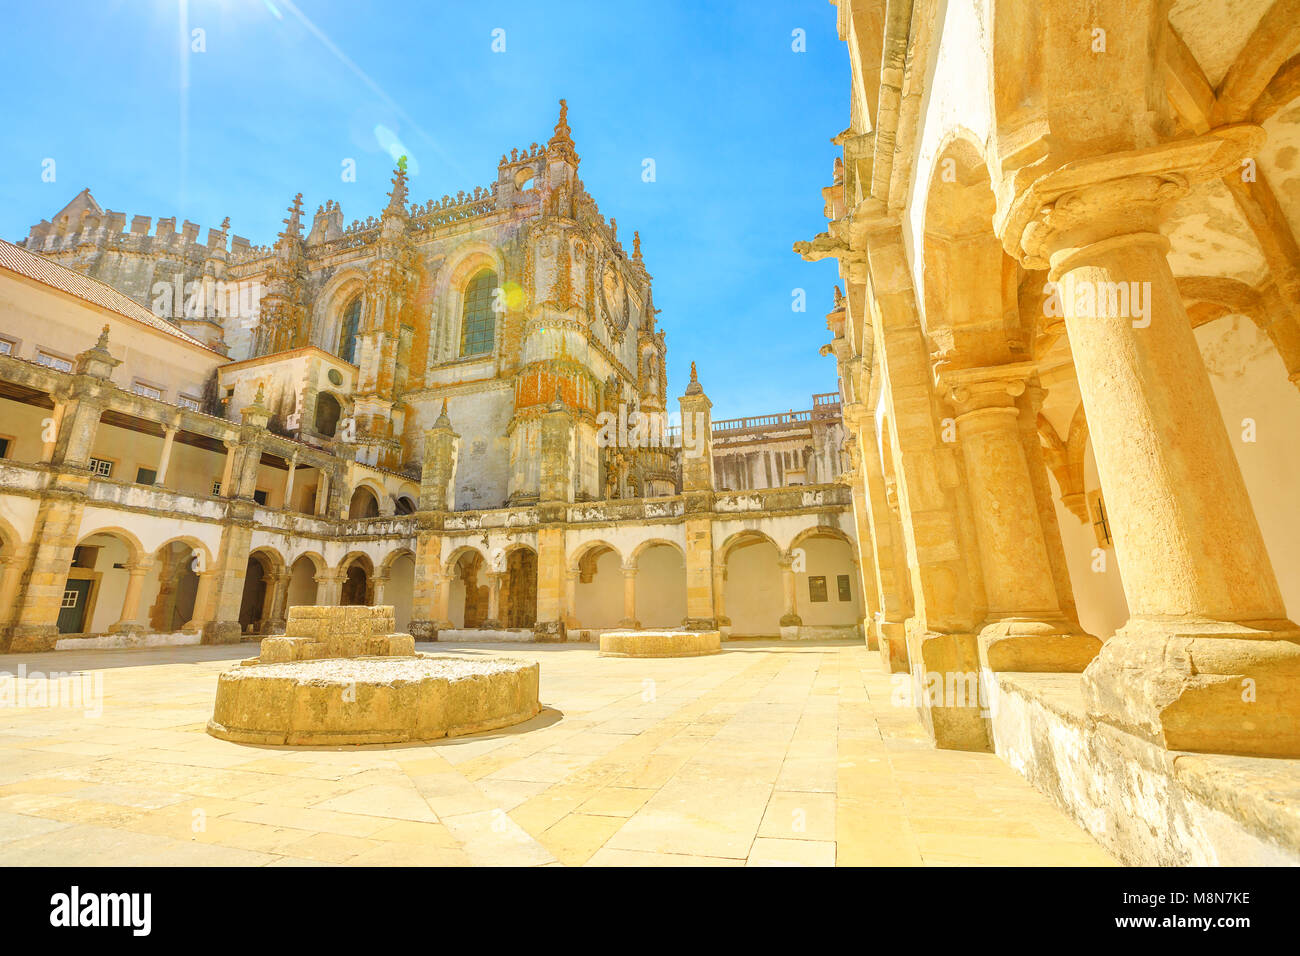 Portugal, Tomar. Prospective view of Claustro from Micha or Claustro da Micha, located in northern part of Convent of Christ in Templar Castle. Unesco Heritage and popular destination in Europe. Stock Photo